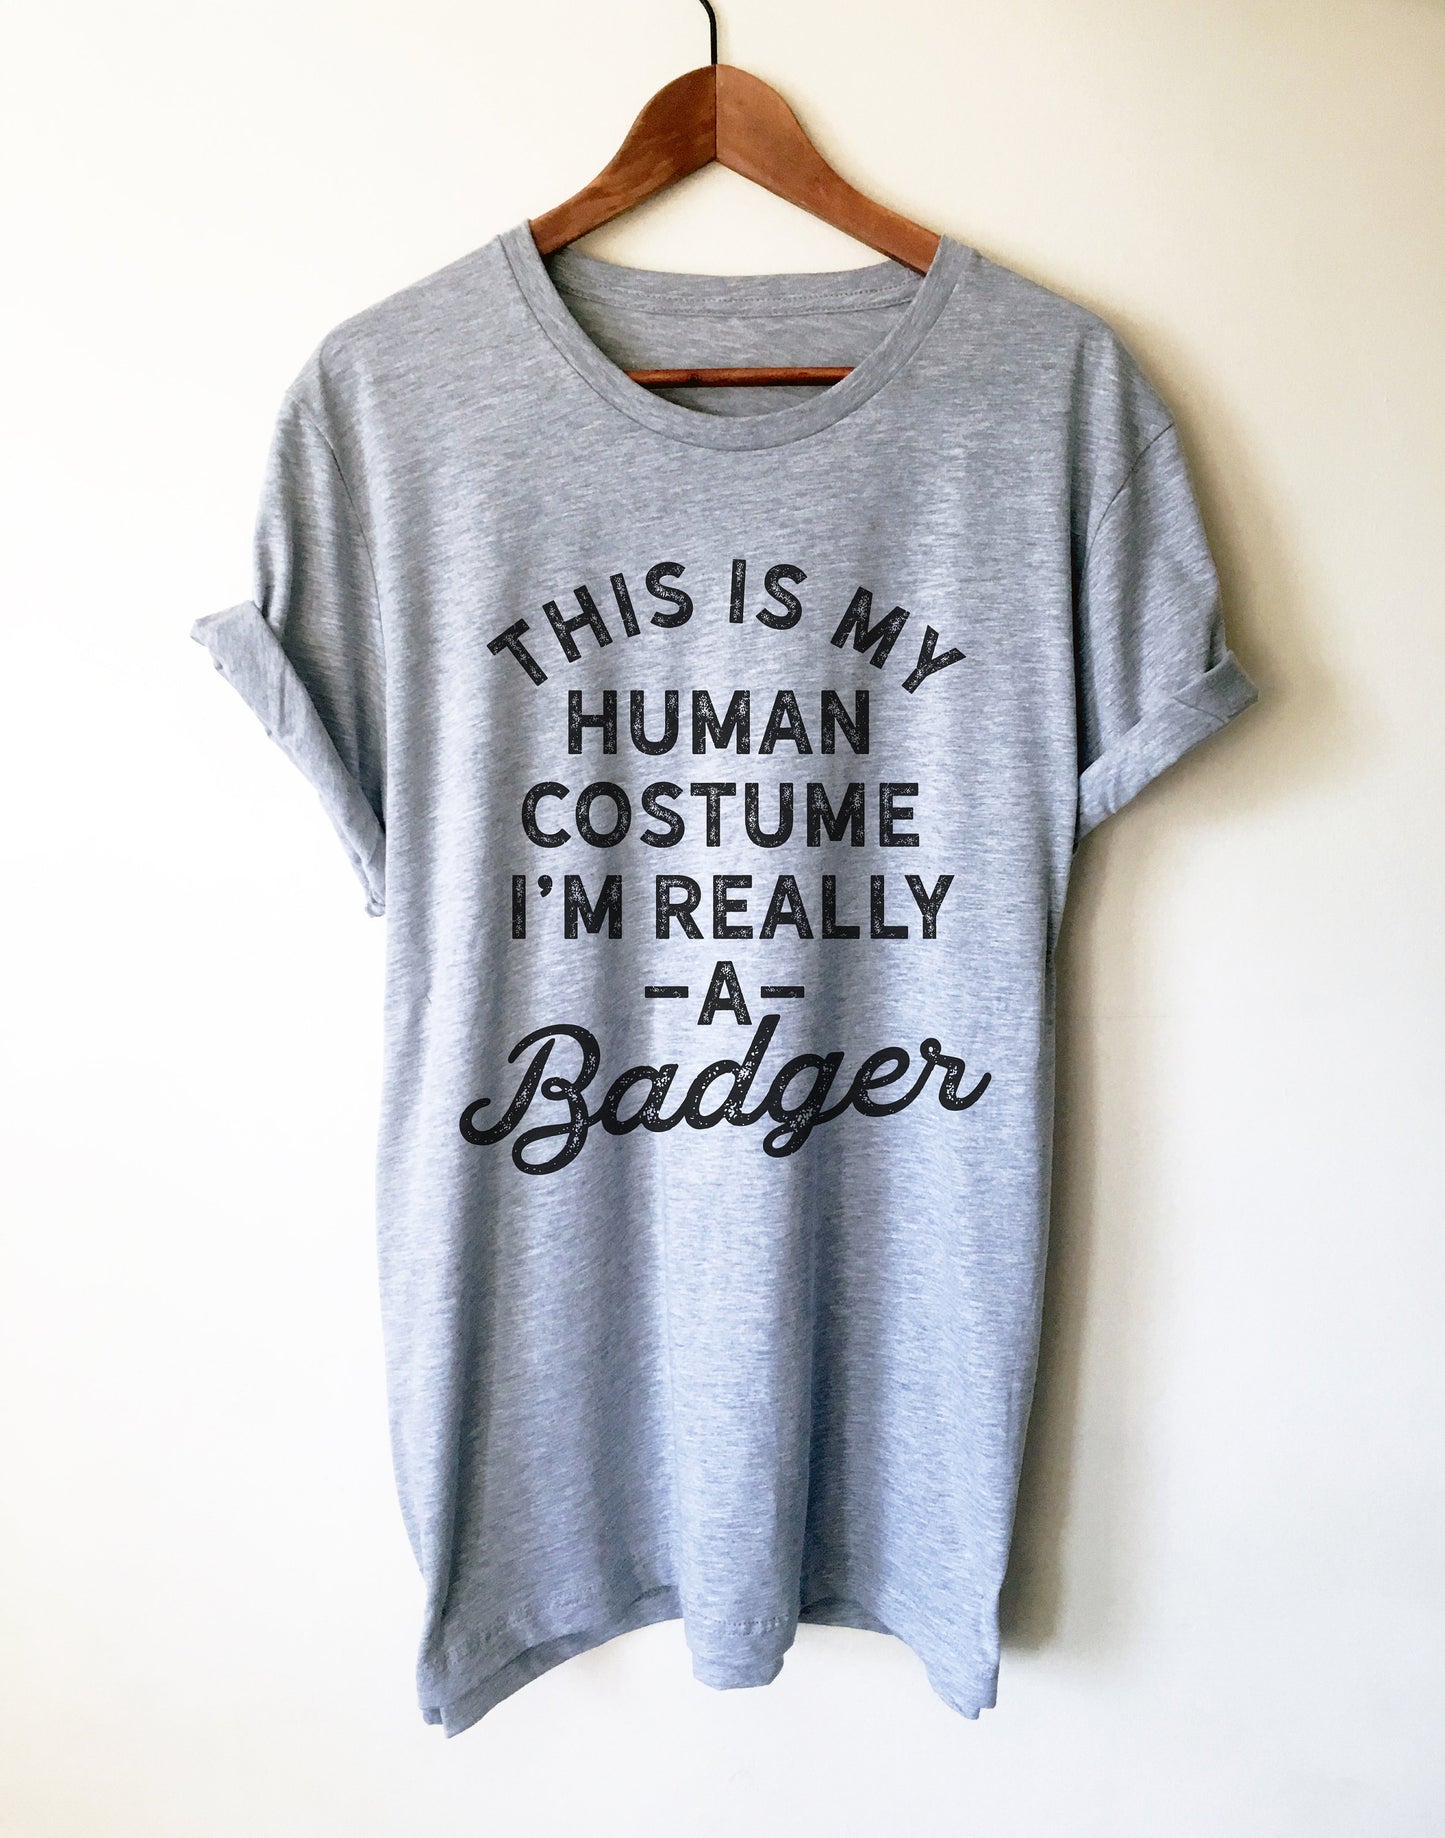 This Is My Human Costume I'm Really A Badger Unisex Shirt - Badger Shirt, Badger Gift, Badger Lover Gift, Badger Lover Shirt, Honey Badger